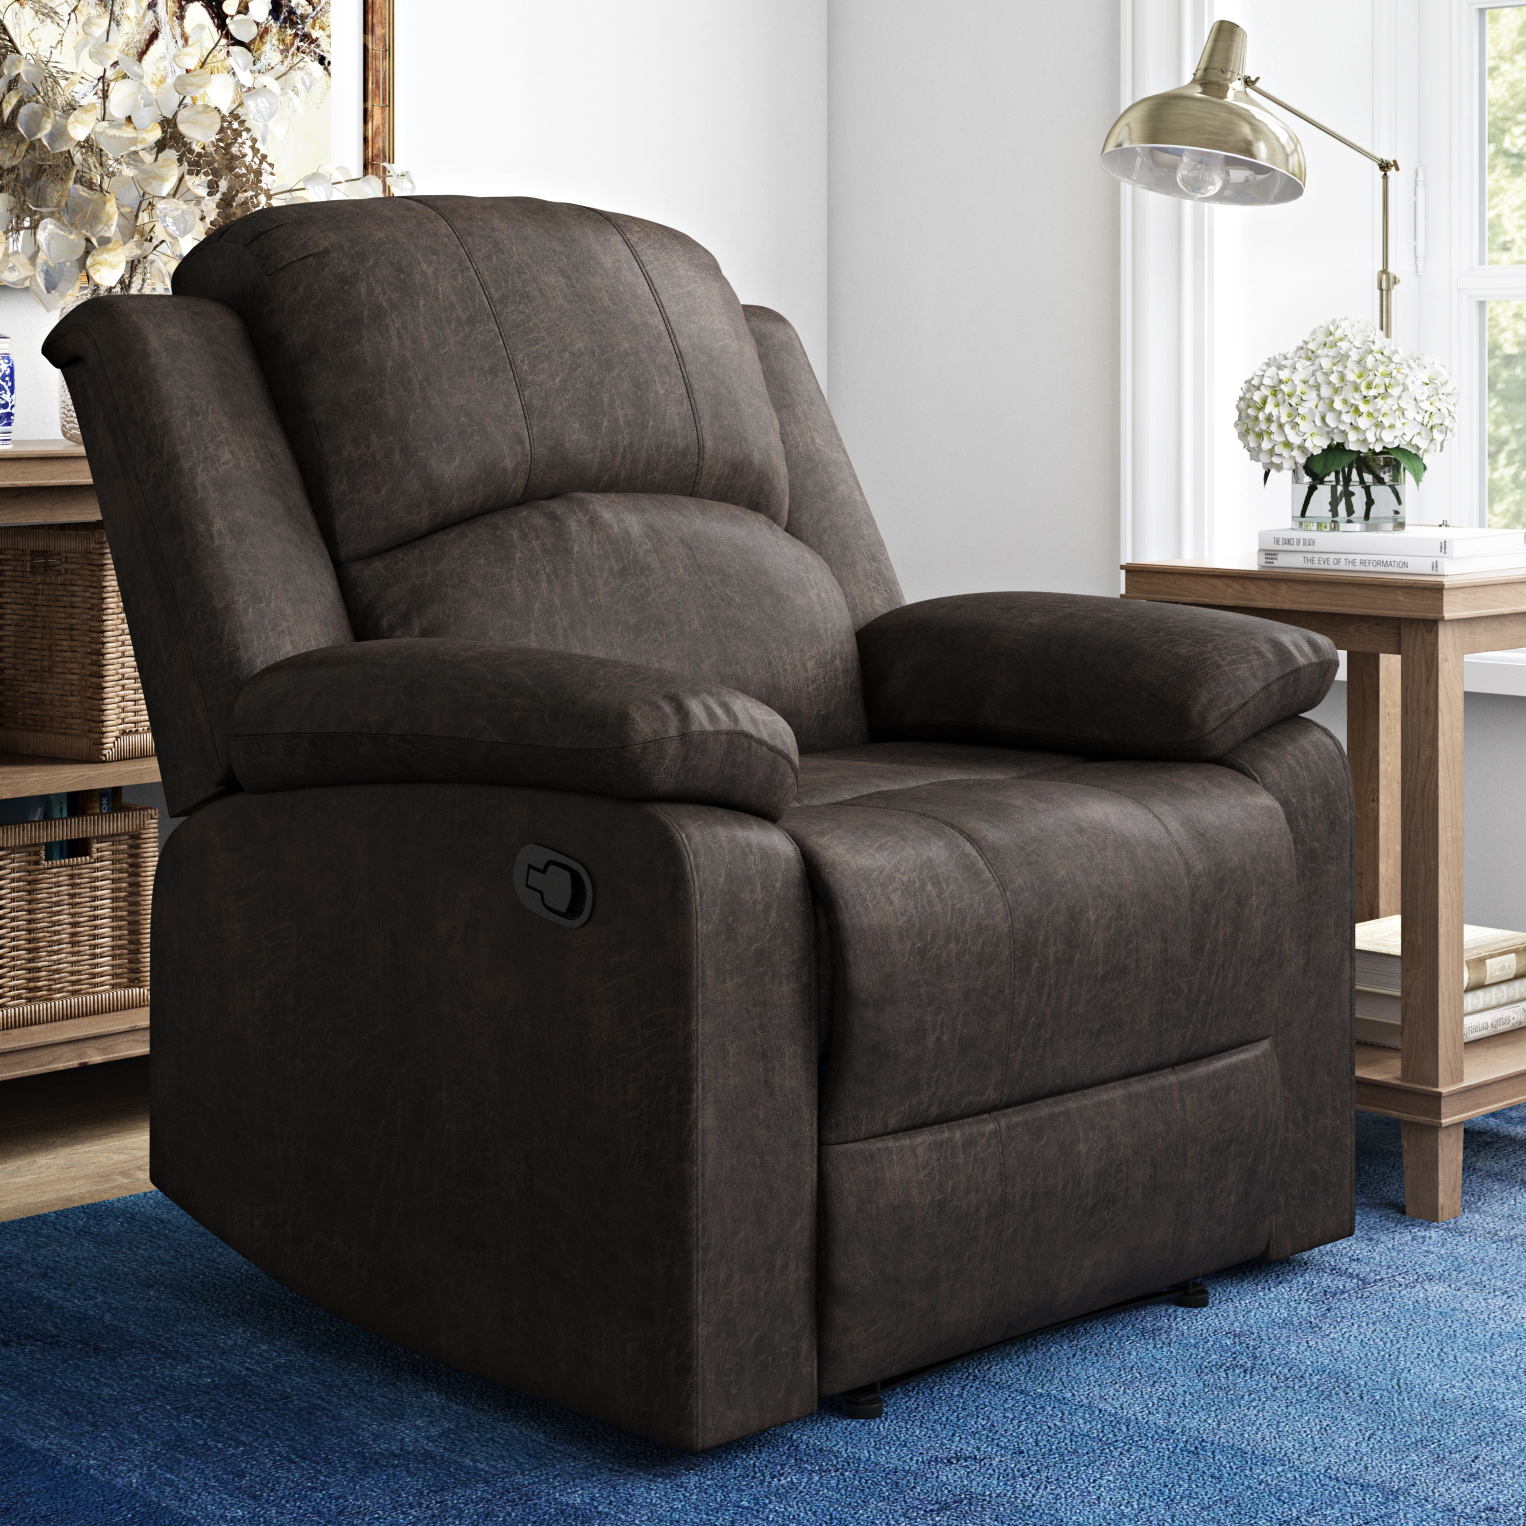 Relax-a-Lounger Reynolds Manual Standard Recliner, Brown Faux Suede - image 1 of 13